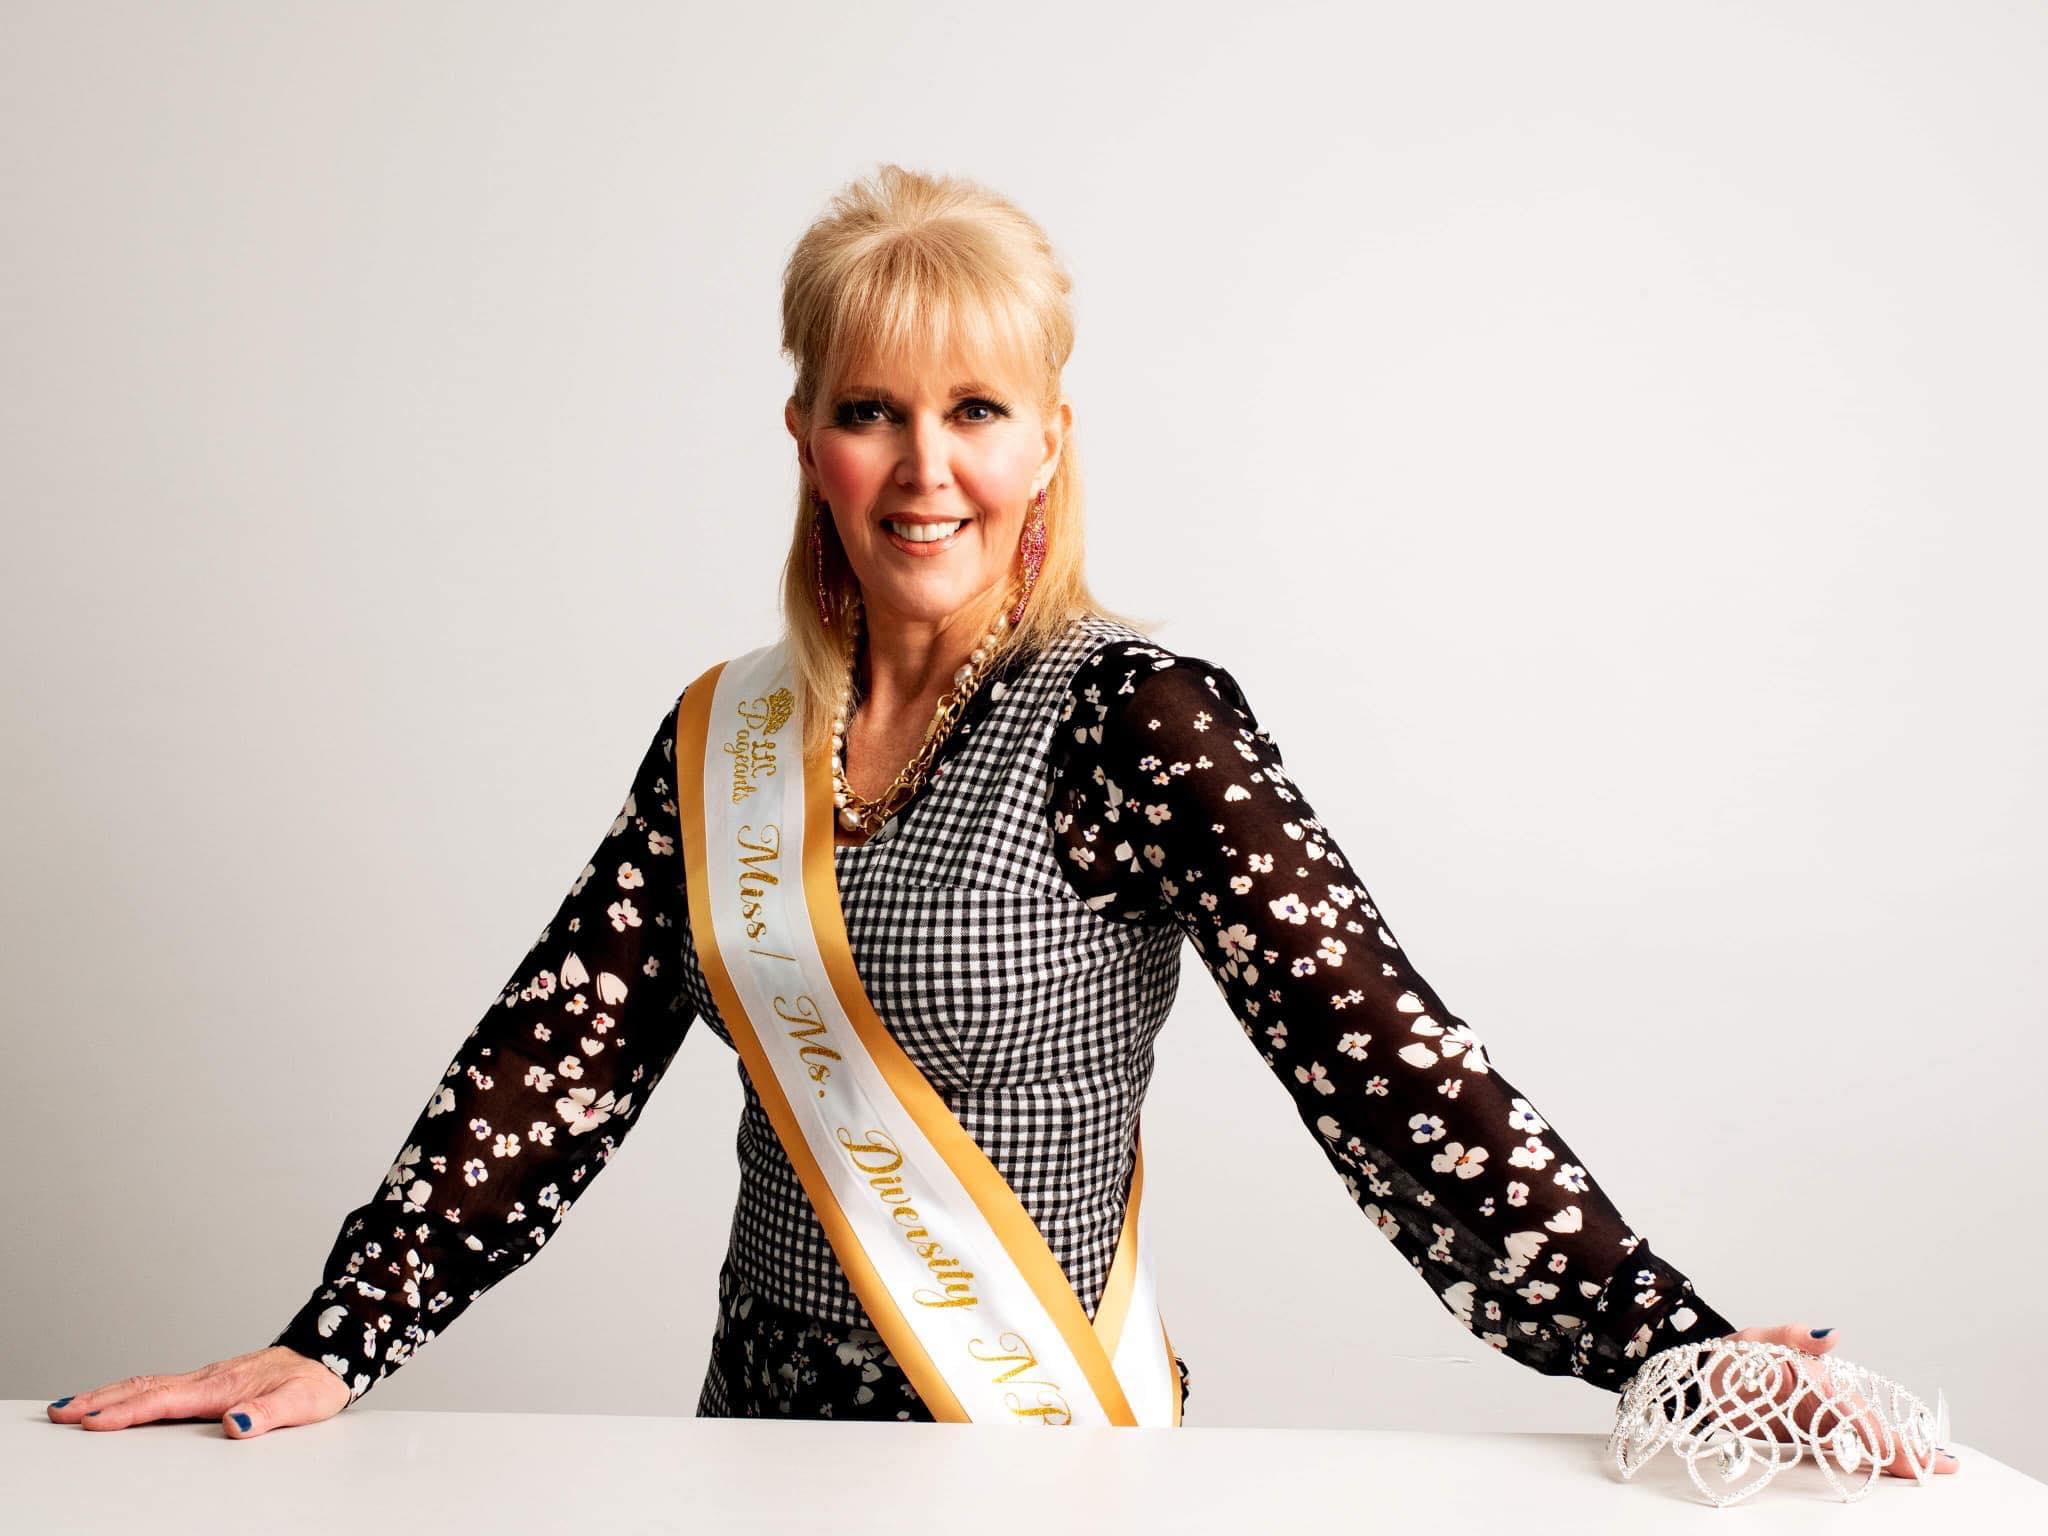 New Brunswick woman breaks age barrier at Miss Universe Canada competition